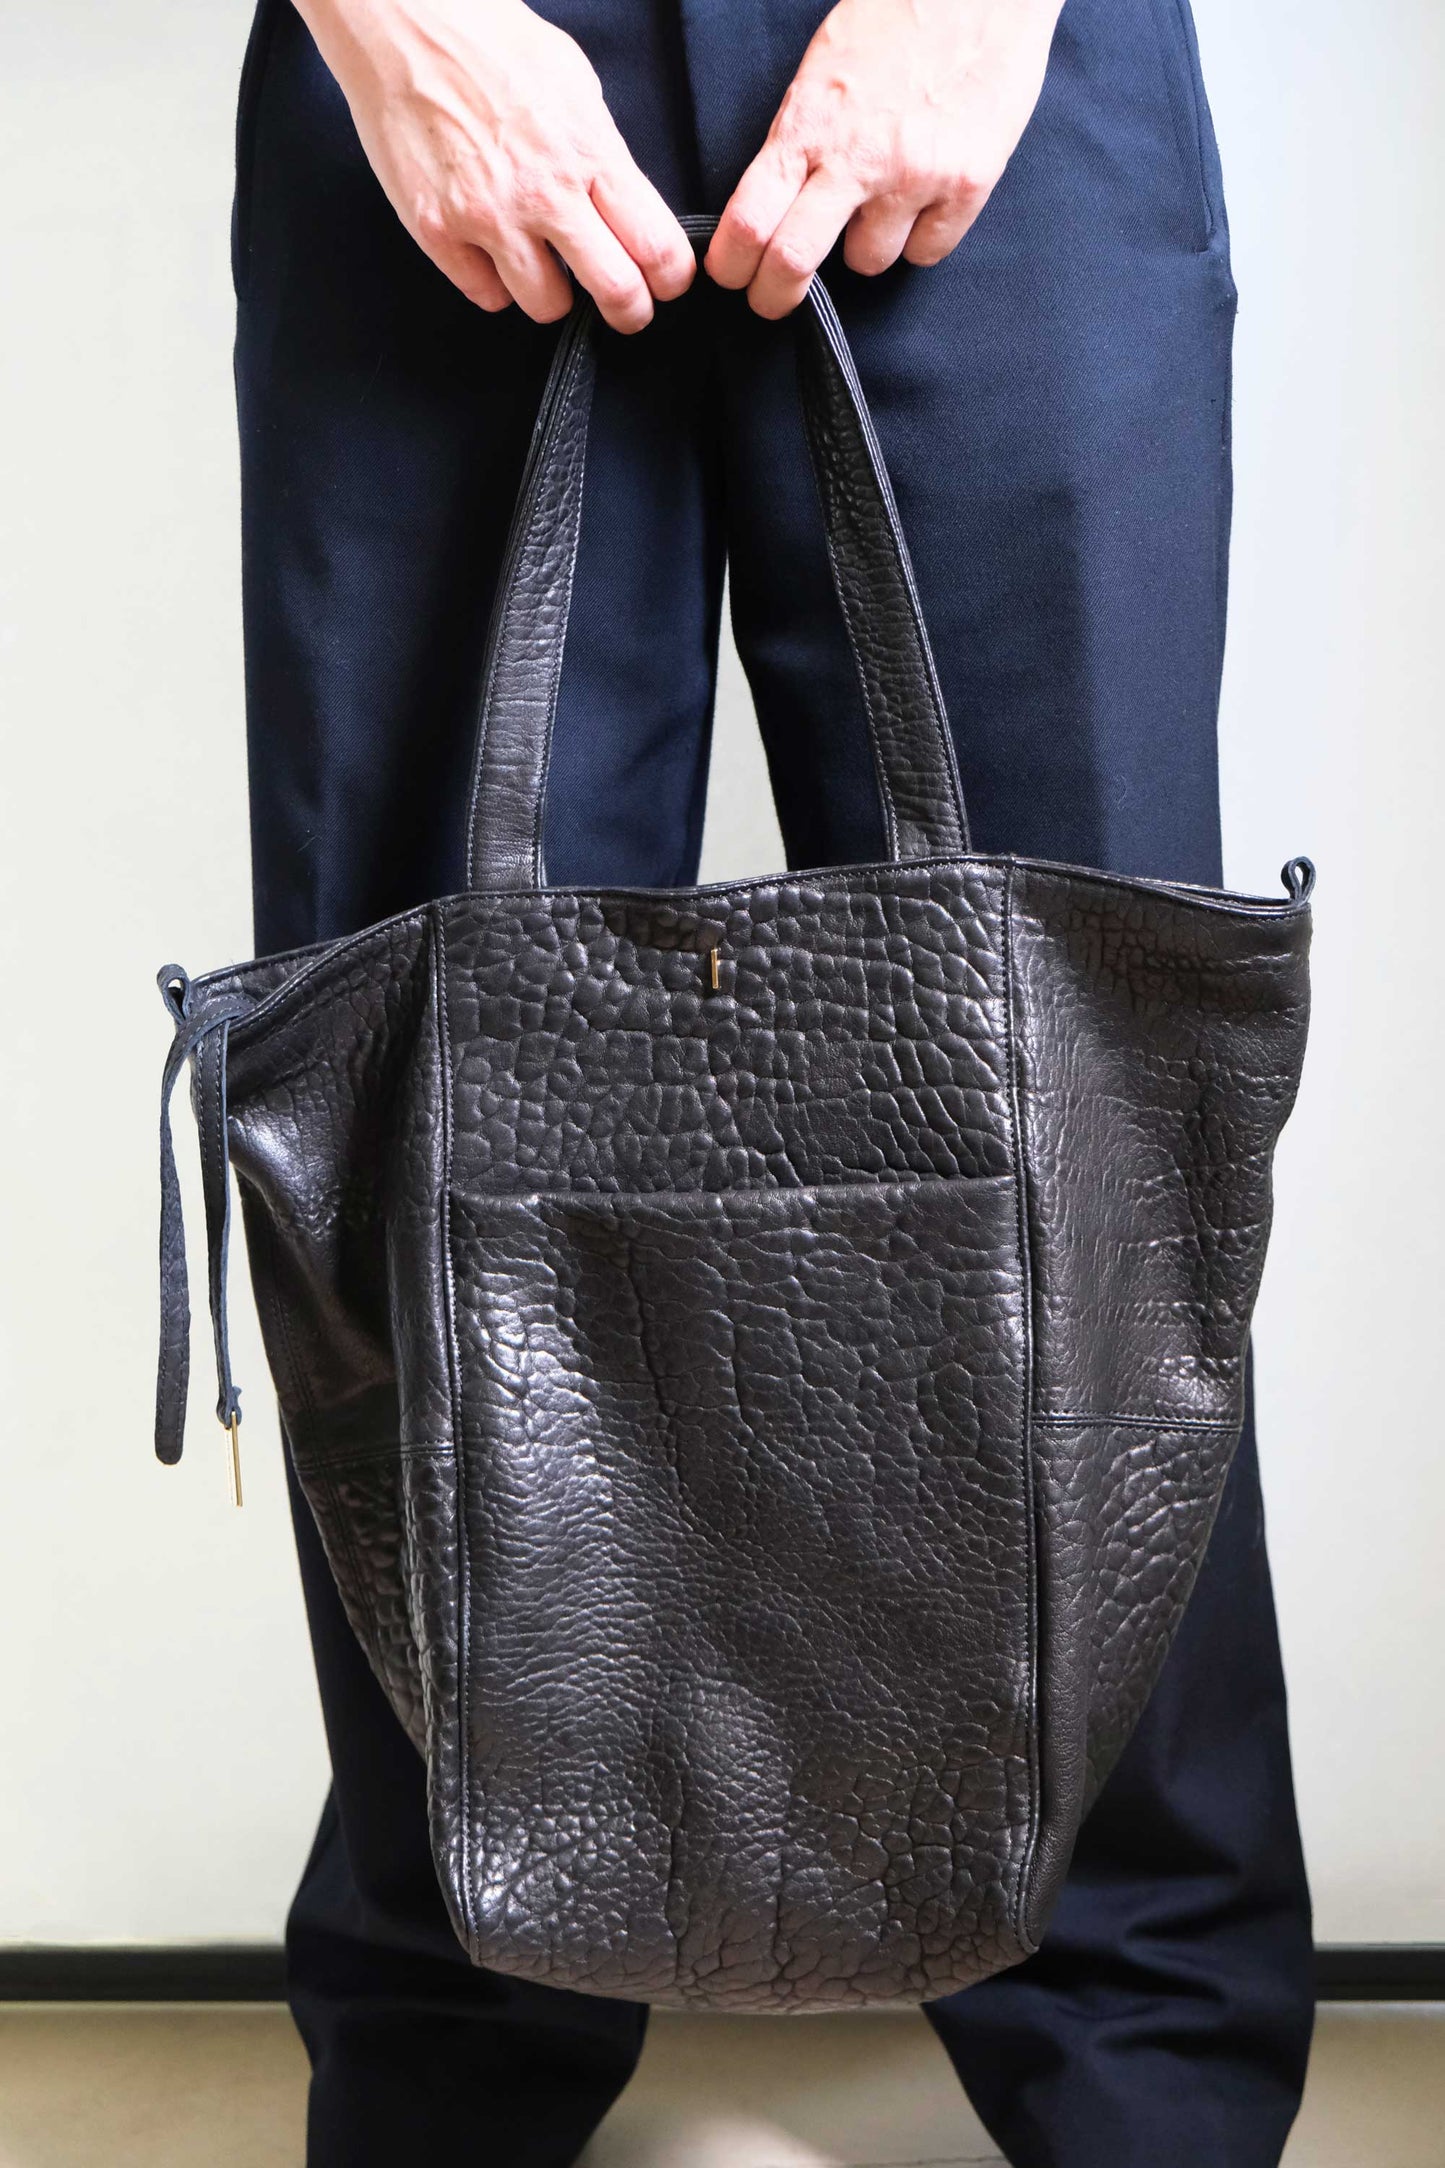 Mele tote bag in mutton vegetable leather